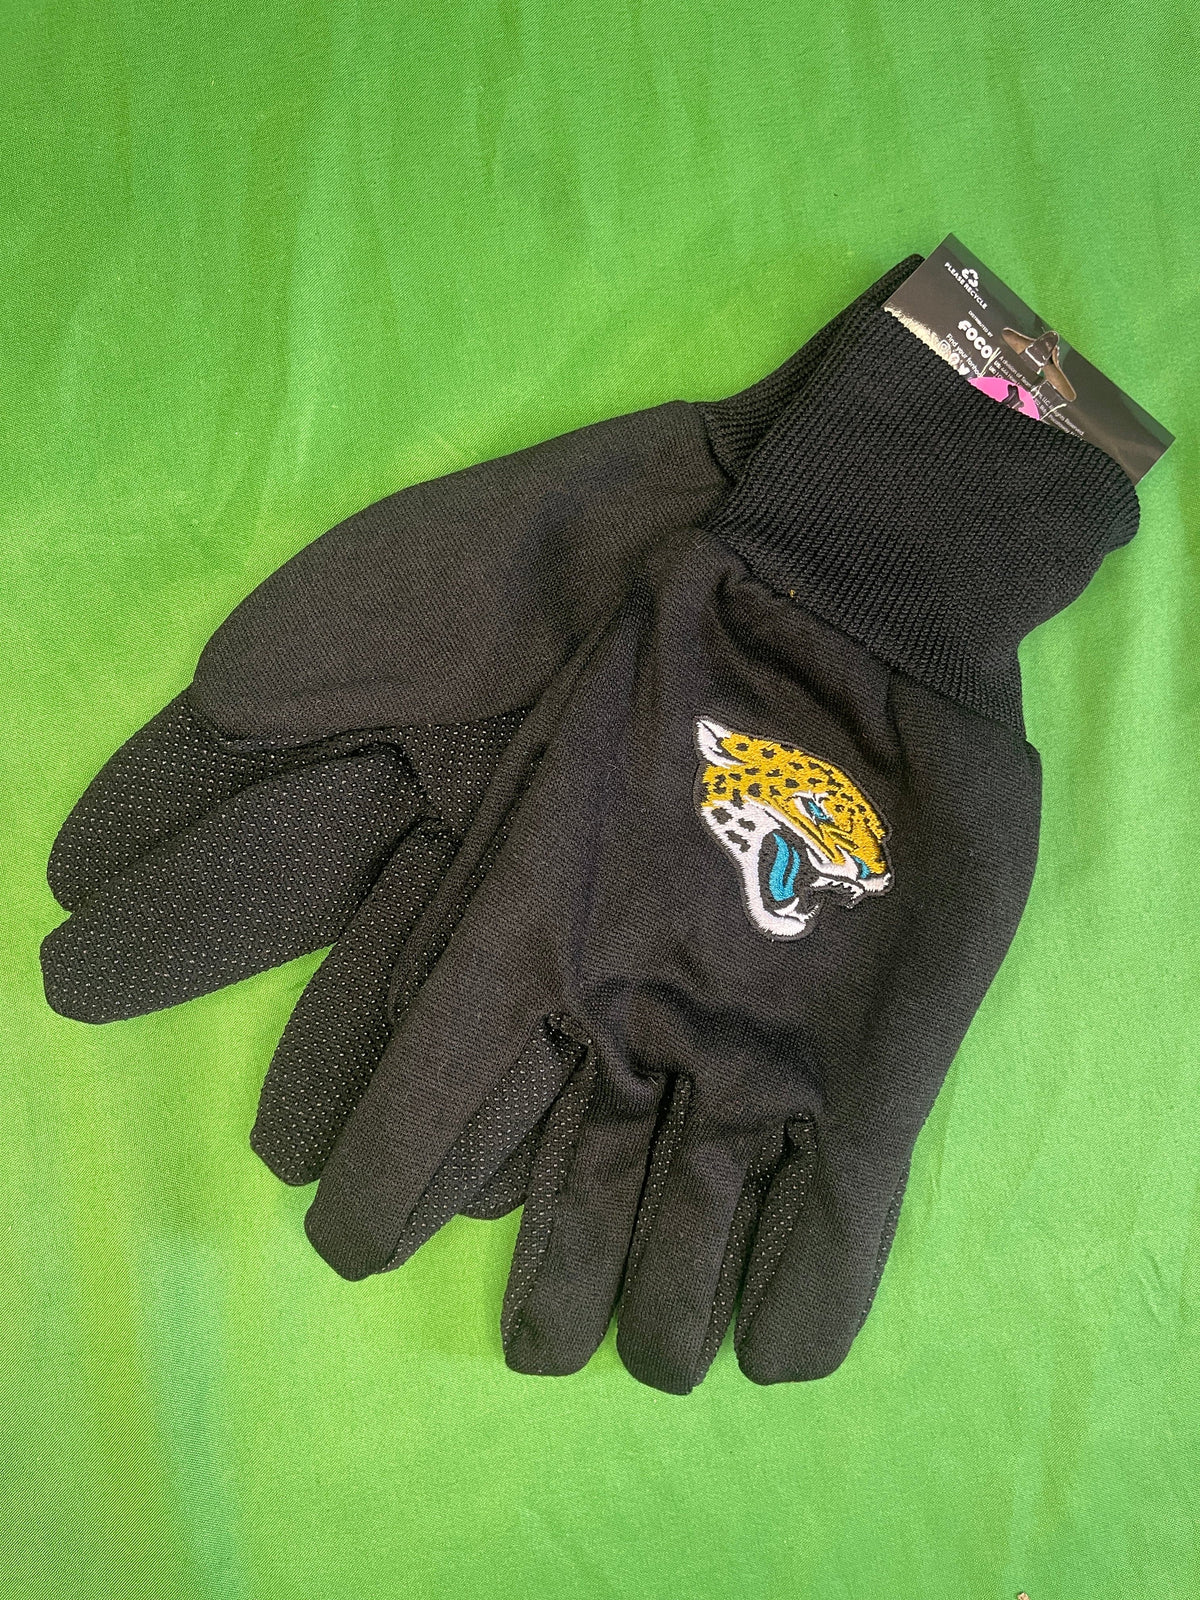 NFL Jacksonville Jaguars FOCO Utility Gloves Perfect for Game/Gardening NWT